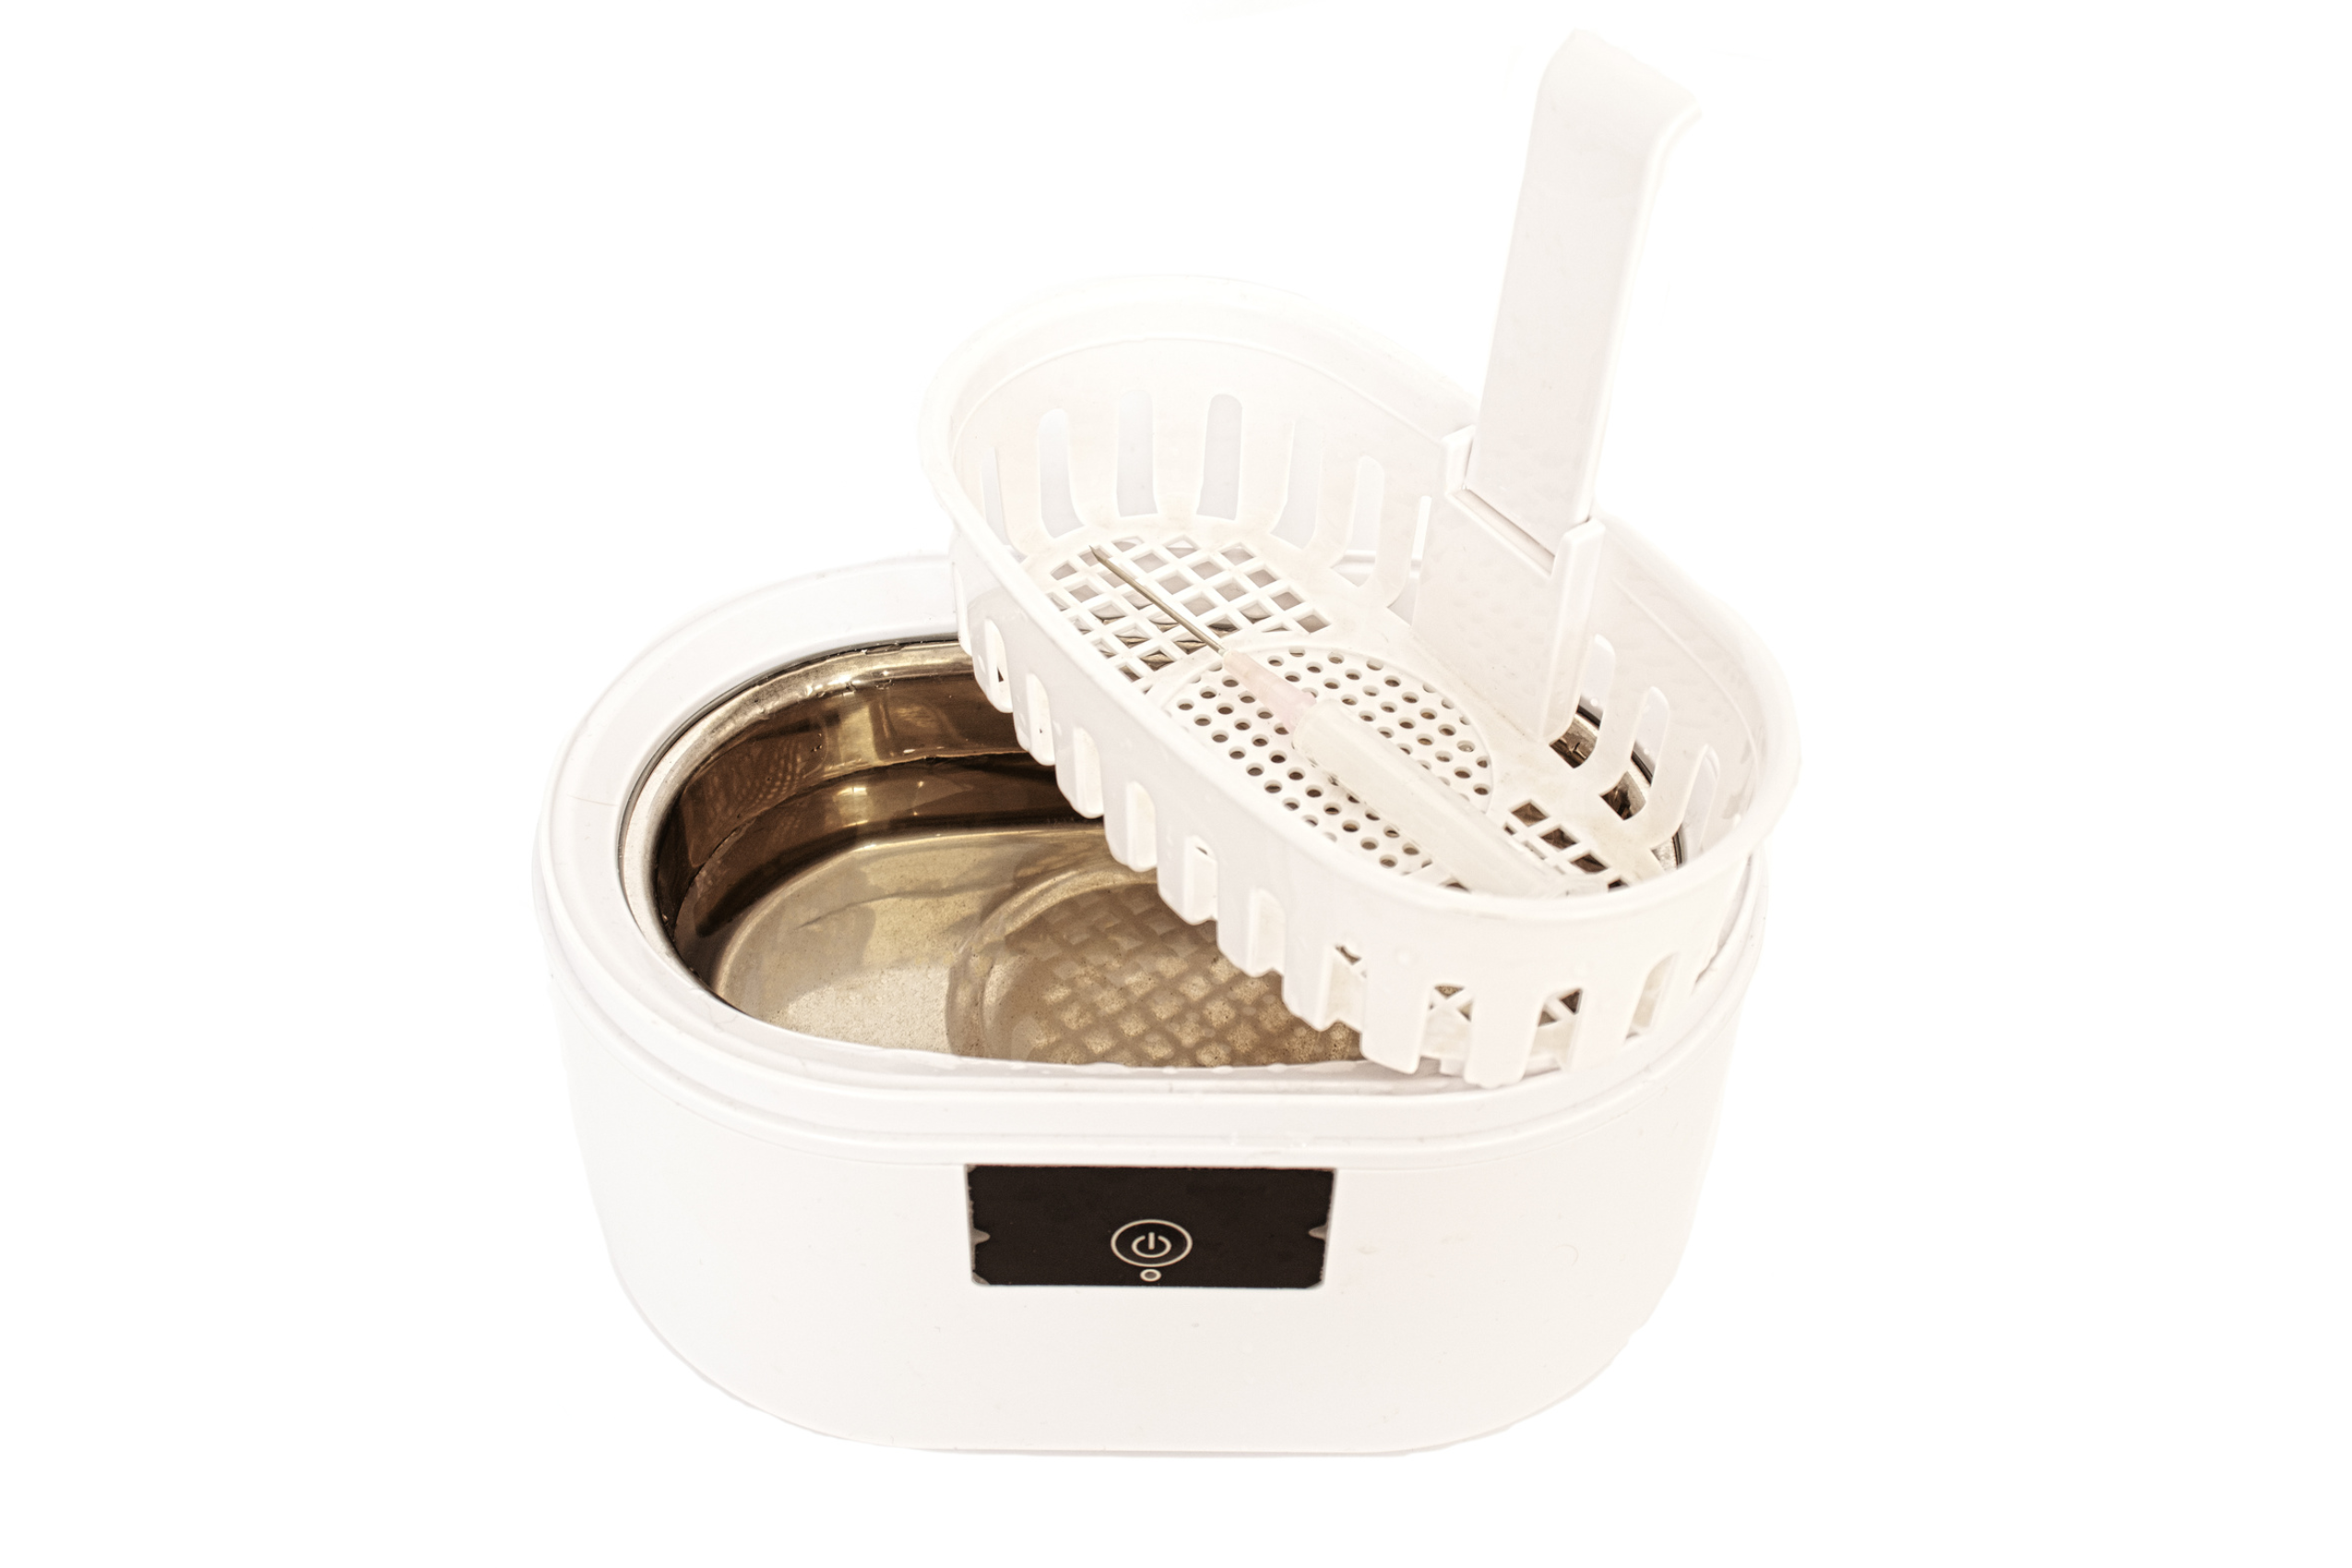 A sonic jewelry cleaner that's used to clean bridal rings and other jewelry. 